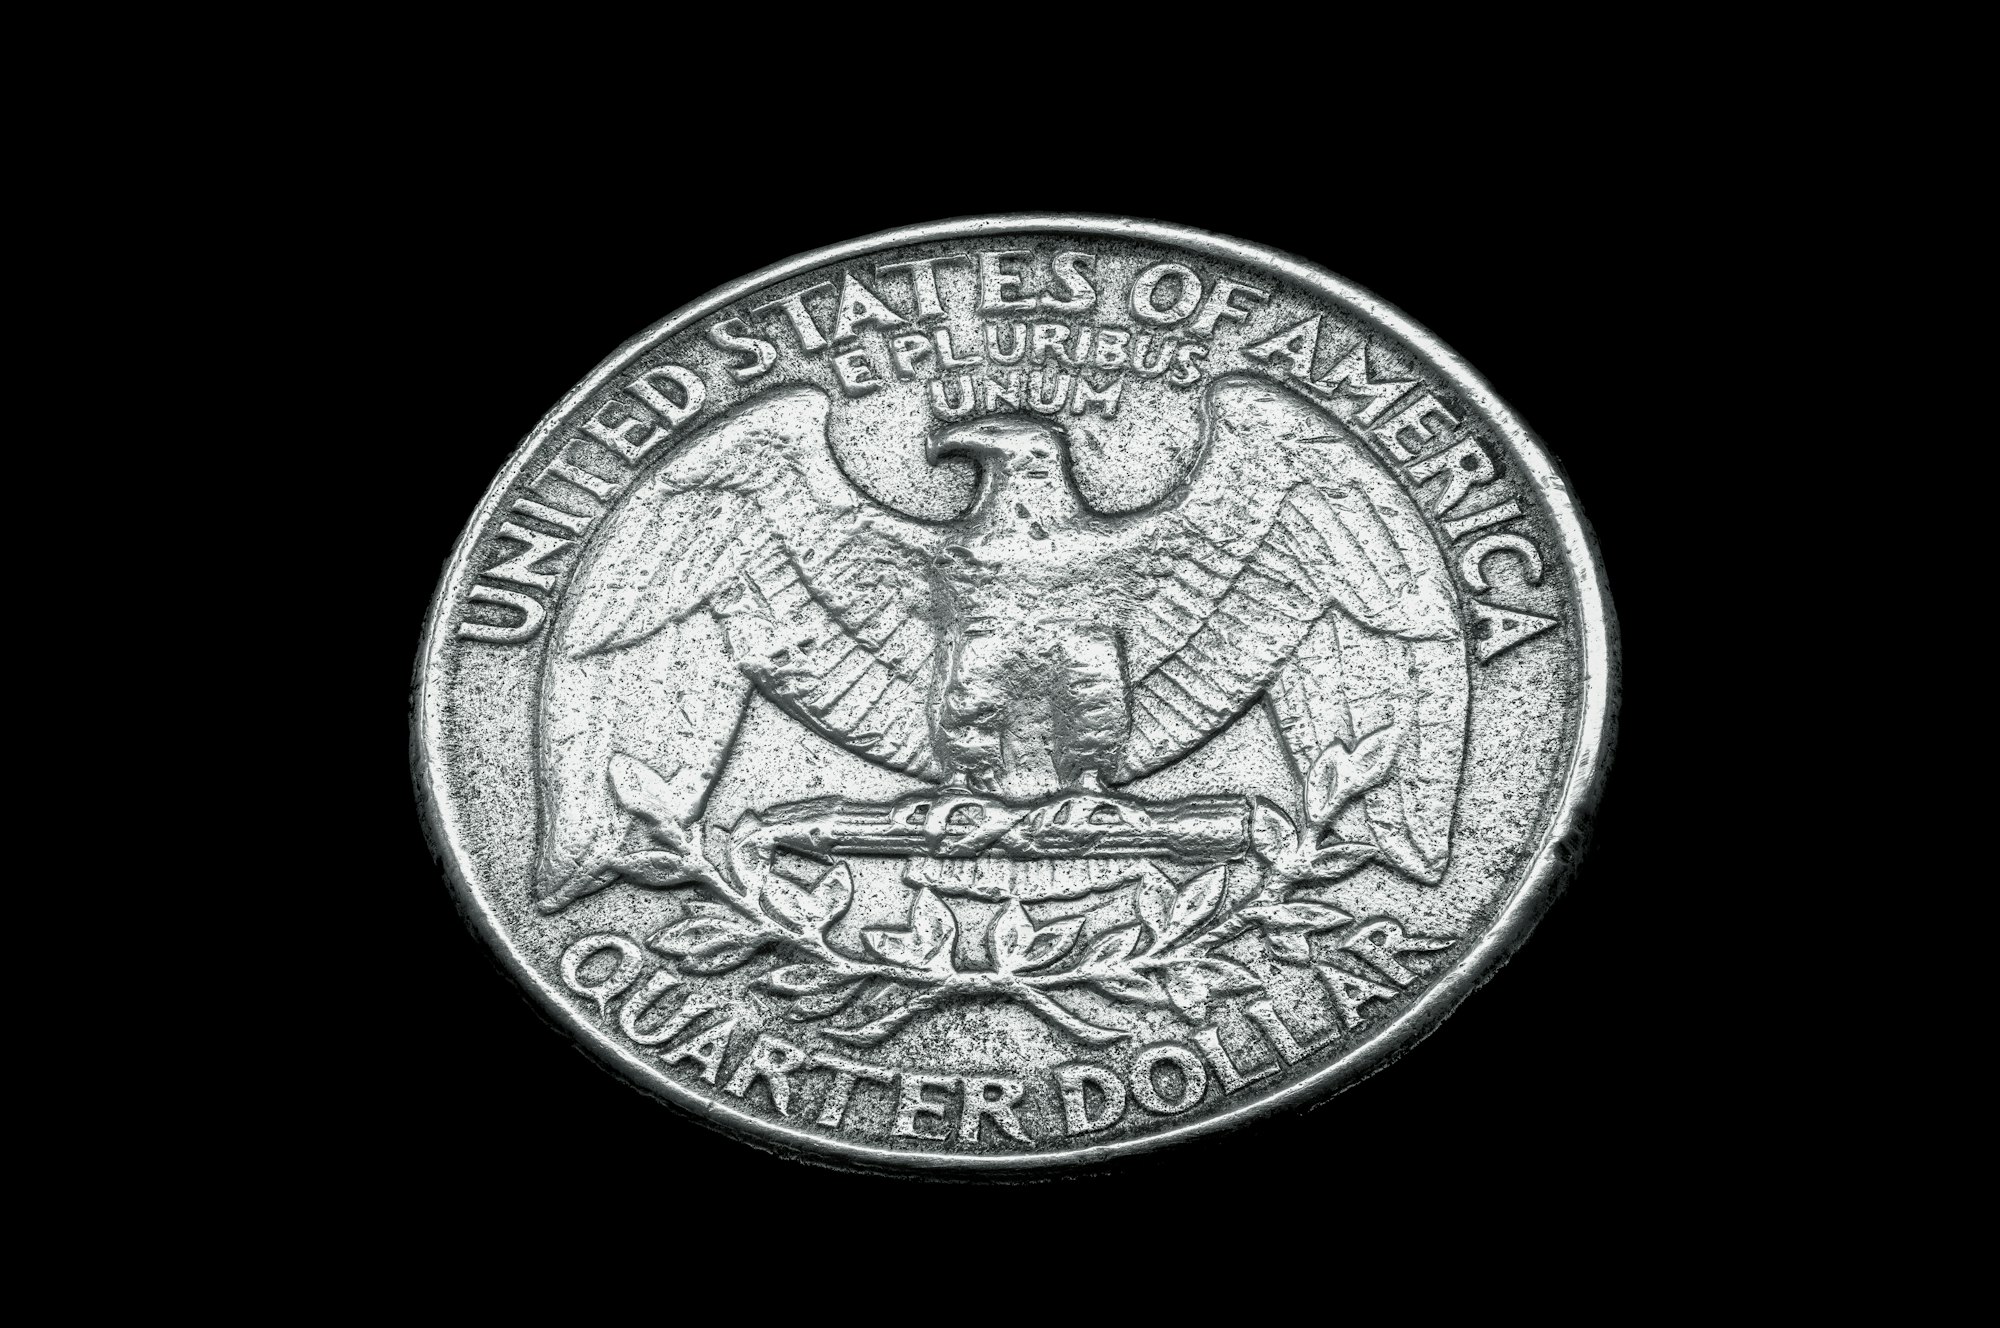 Which U.S. State Quarter Features A Guitar, A Trumpet, And A Fiddle?